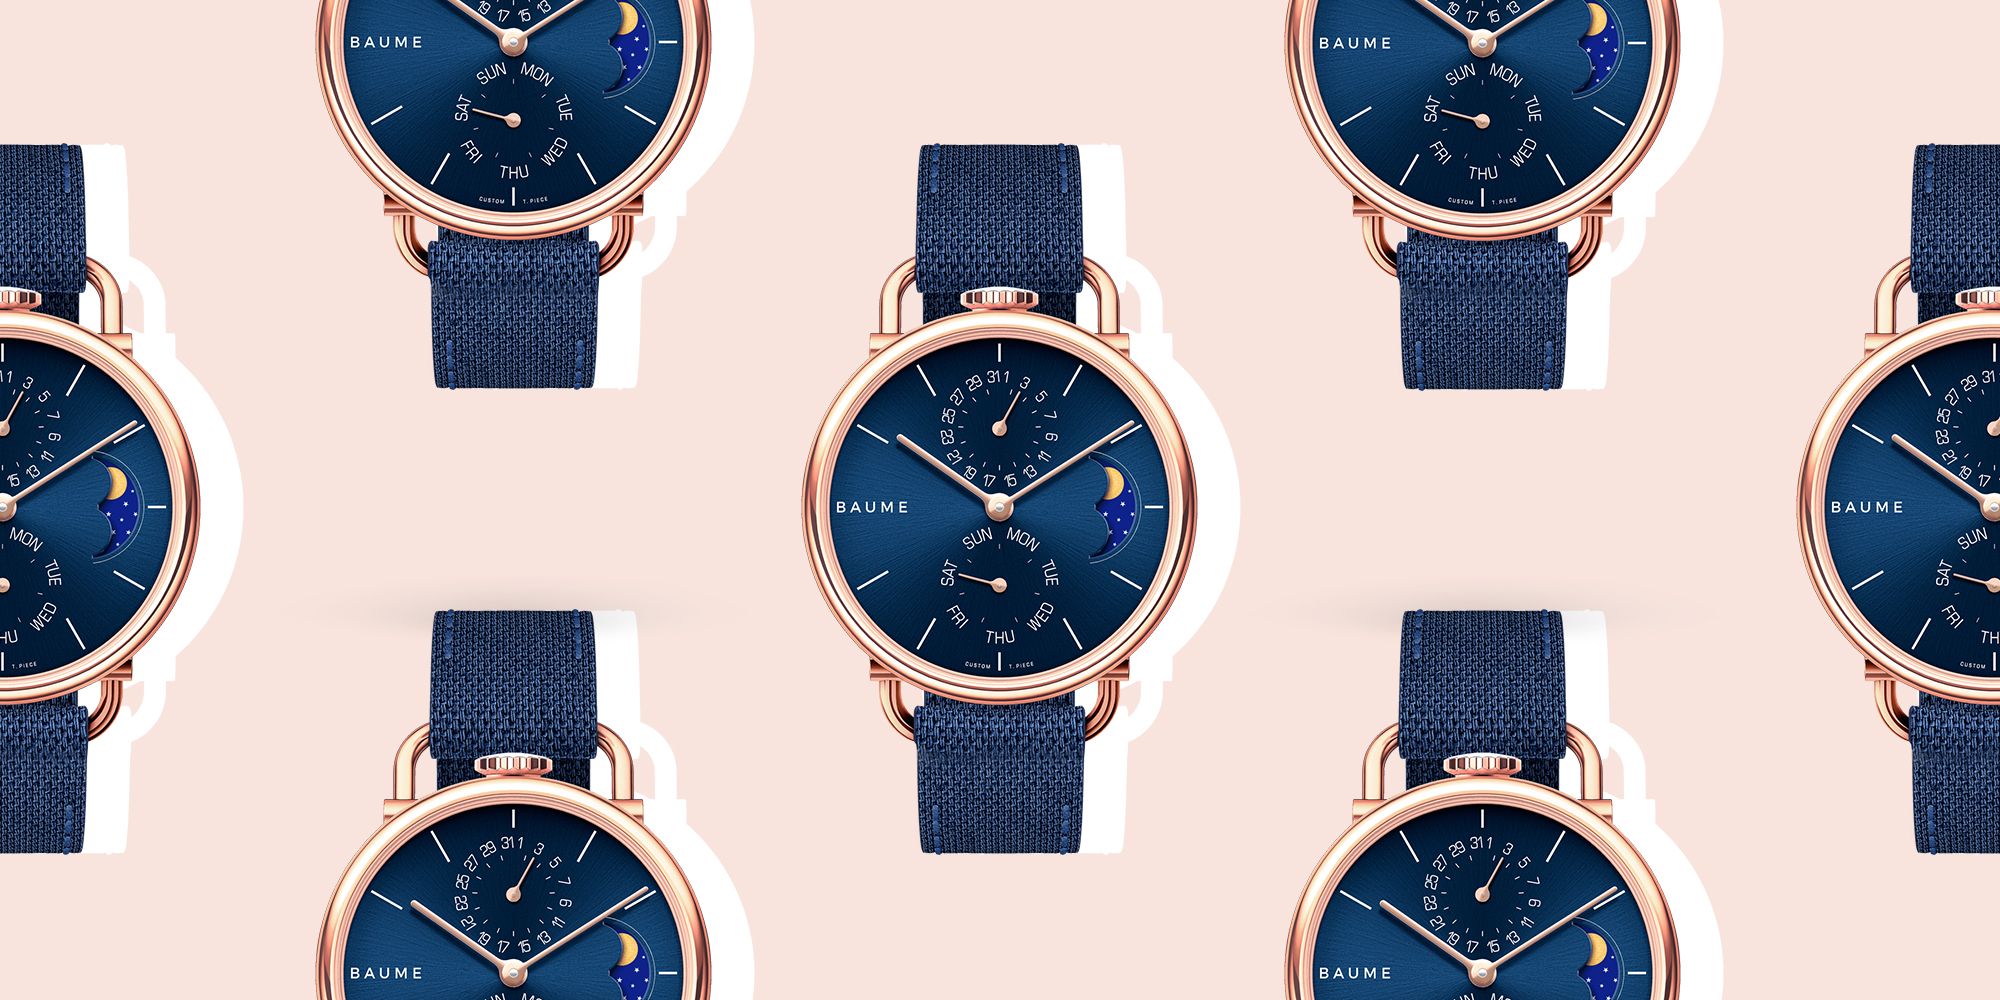 Introducing Baume: The Latest Entry-Level Watch Brand From Richemont